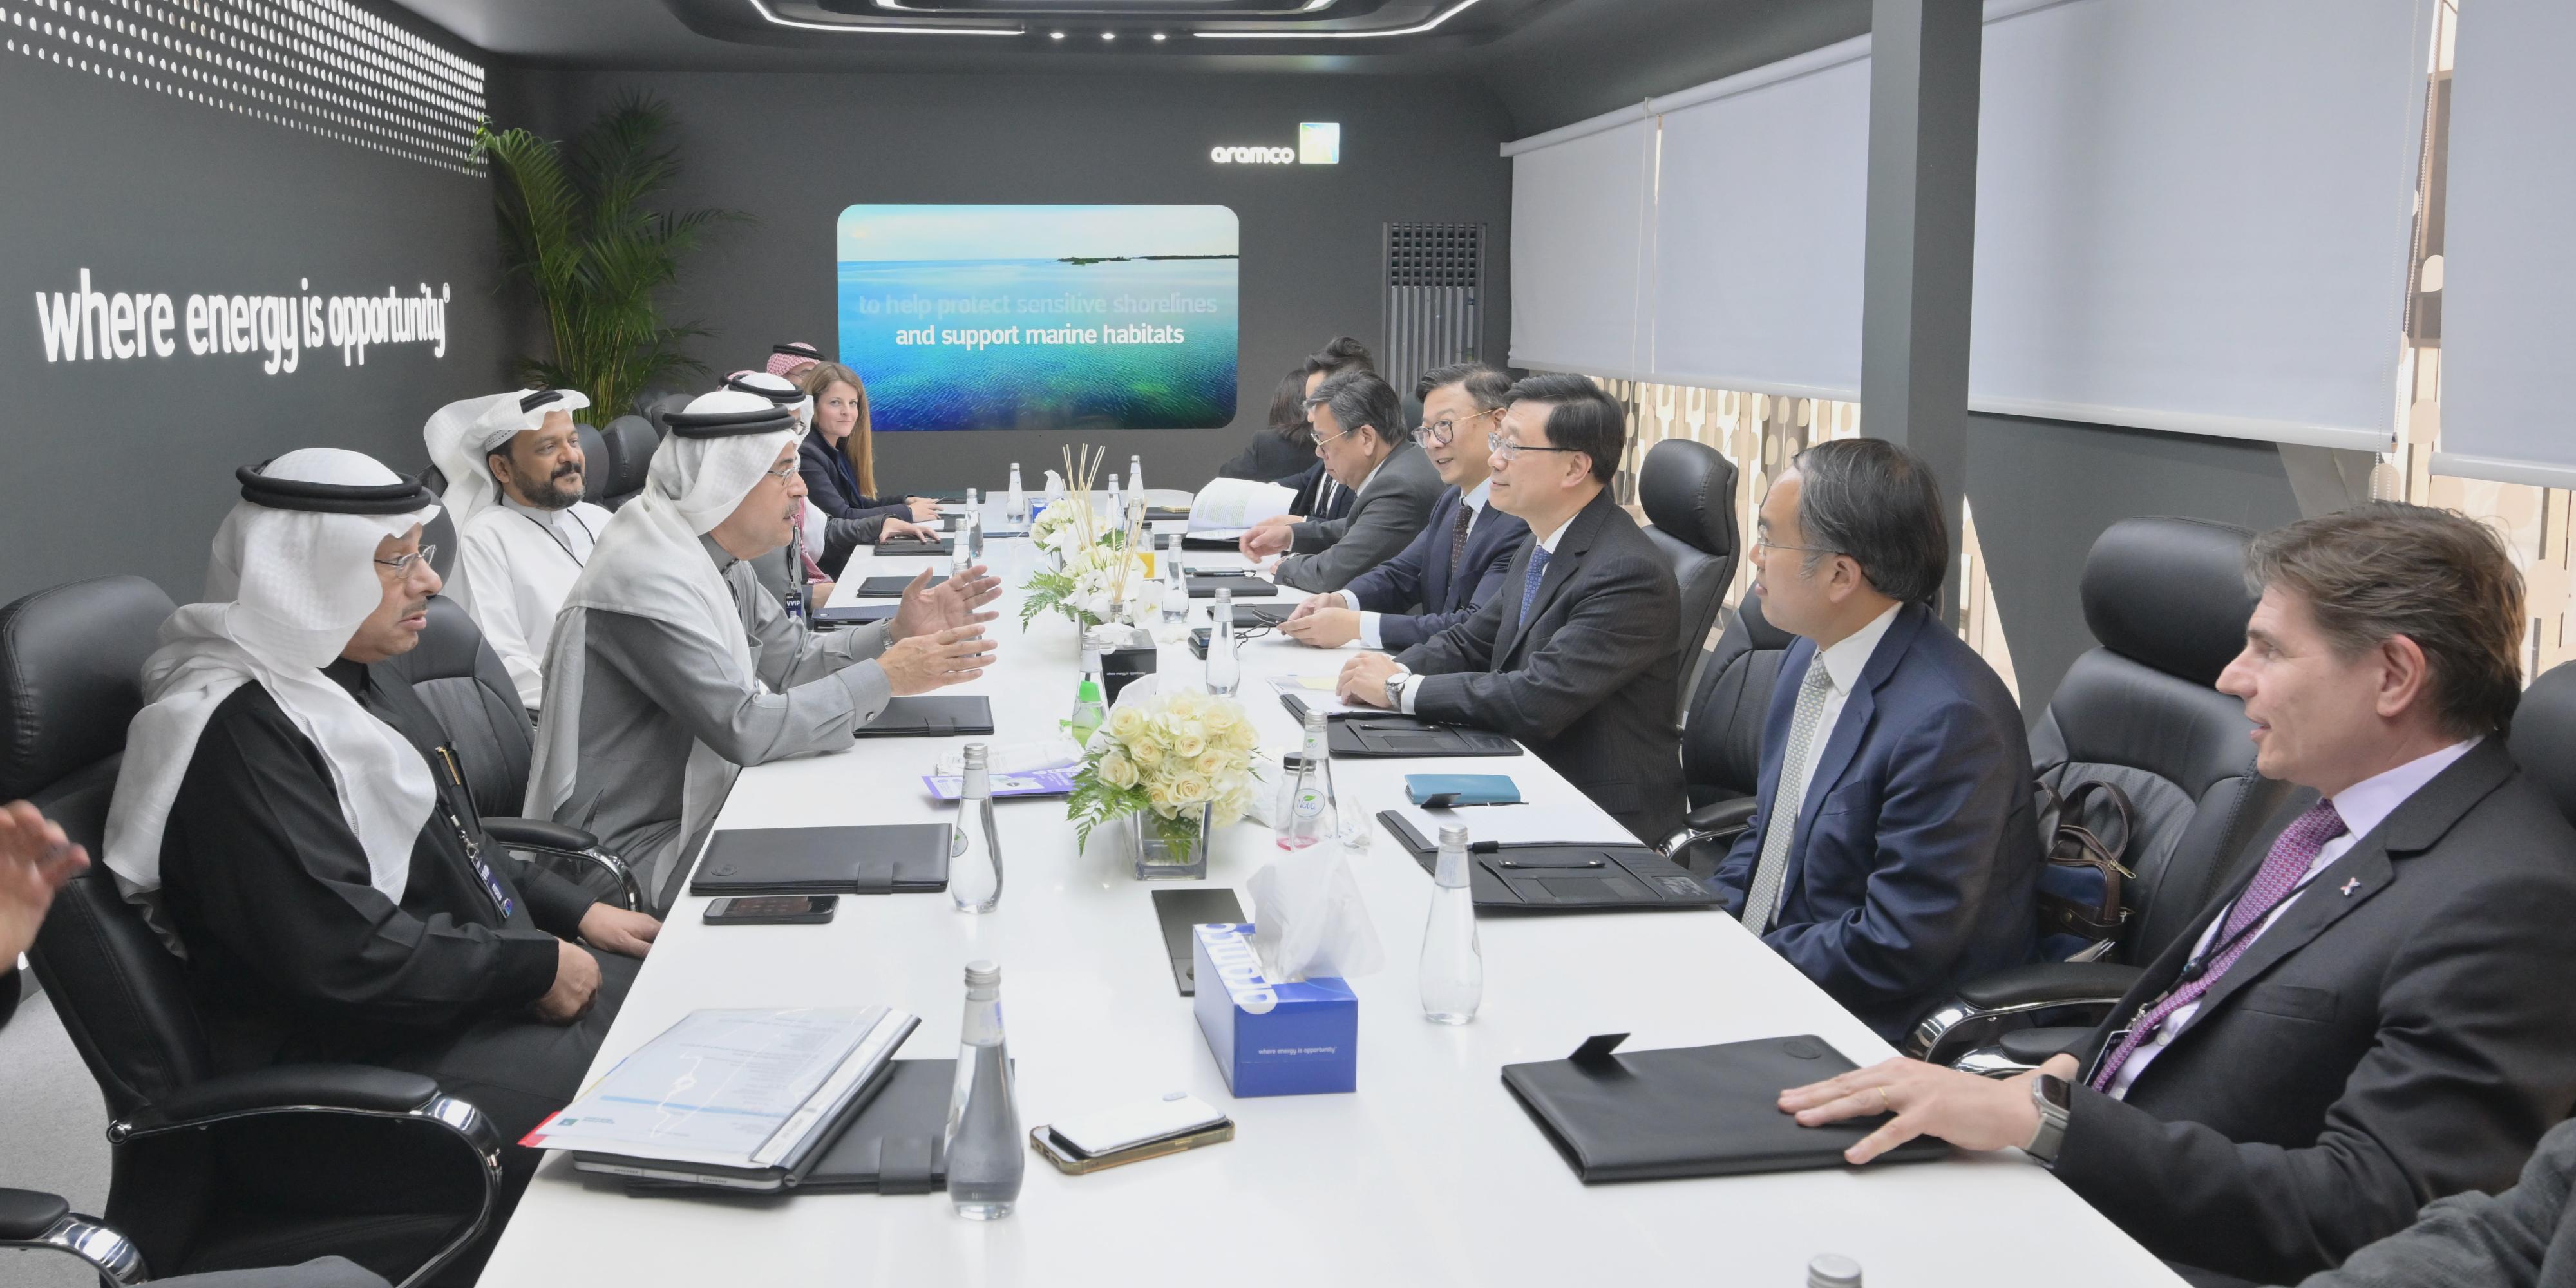 The Chief Executive, Mr John Lee (third right) meets with the President and Chief Executive Officer of Saudi Aramco, Mr Amin H Nasser (second left), in the LEAP 2023 technology conference, Riyadh, Saudi Arabia, today (February 6, Riyadh time). The Deputy Secretary for Justice, Mr Cheung Kwok-kwan (fourth right); the Secretary for Financial Services and the Treasury, Mr Christopher Hui (second right); the Secretary for Commerce and Economic Development, Mr Algernon Yau (fifth right); the Chief Executive Officer of the Hong Kong Exchanges and Clearing Limited, Mr Nicolas Aguzin (first right); and representatives of Saudi Aramco are also present.